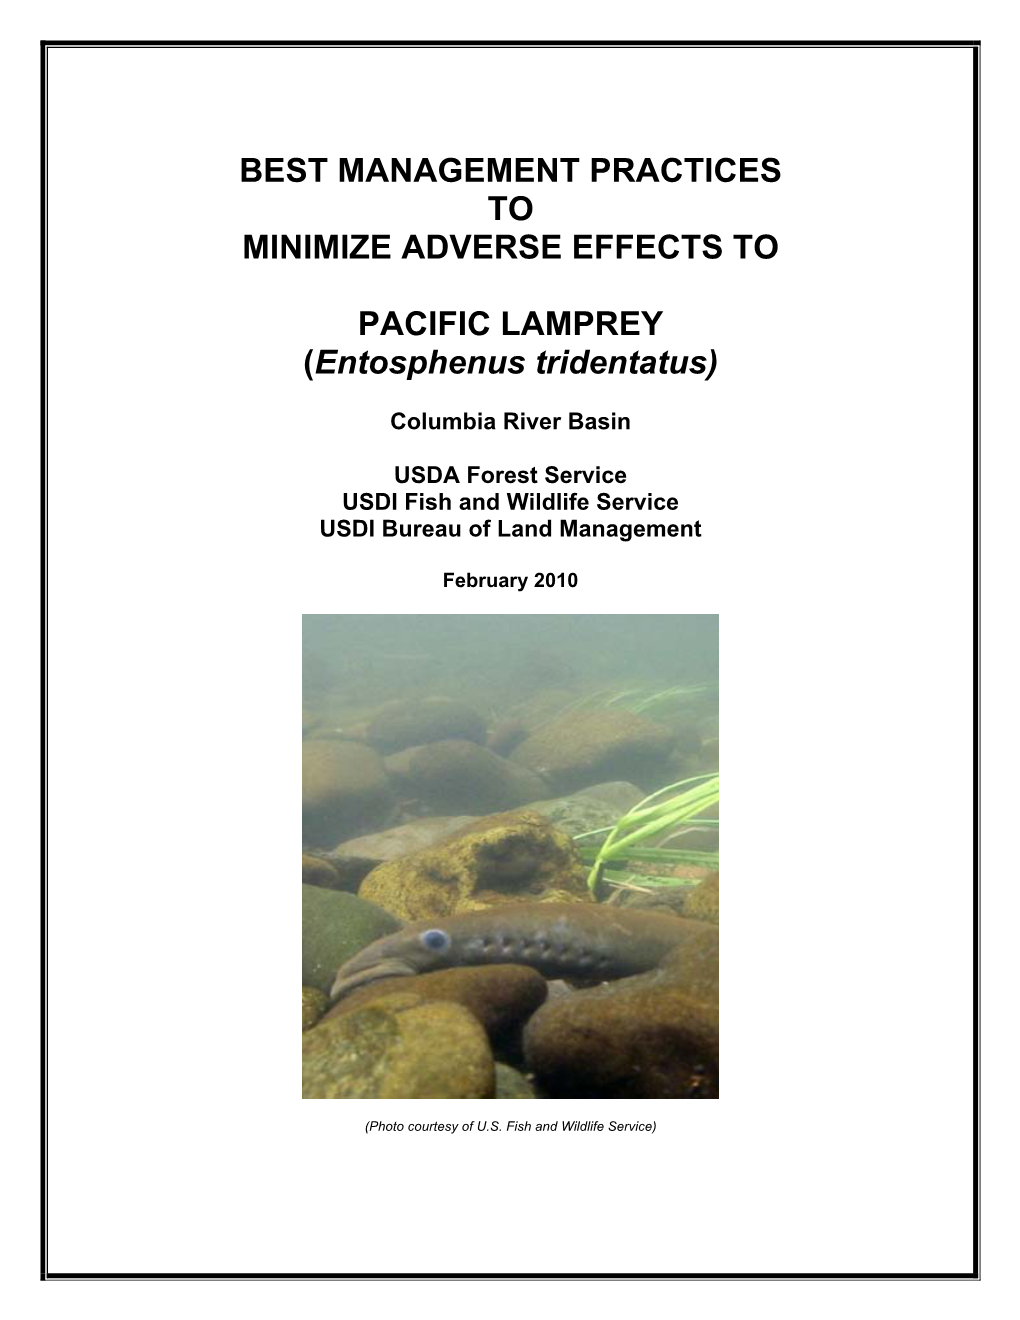 Best Mangement Practices to Minimize Adverse Effects to Pacific